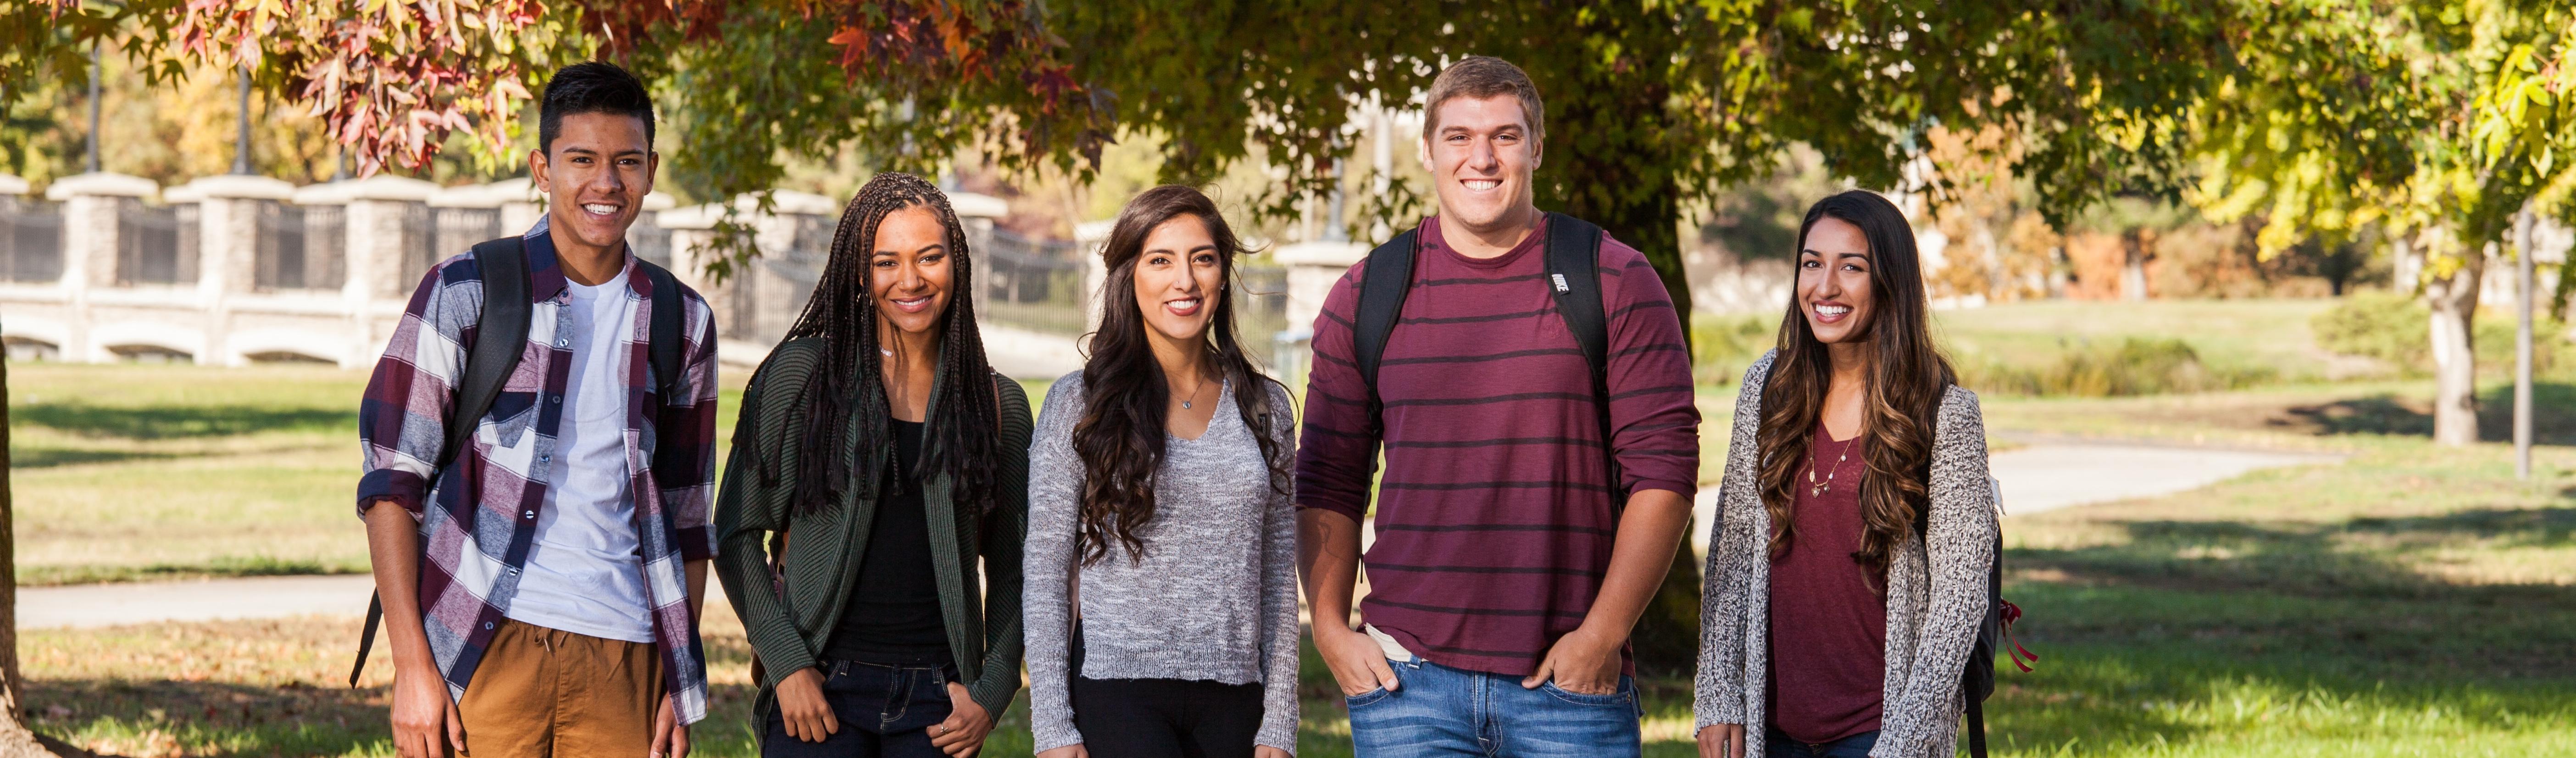 Five students smiling in front of bridge on campus